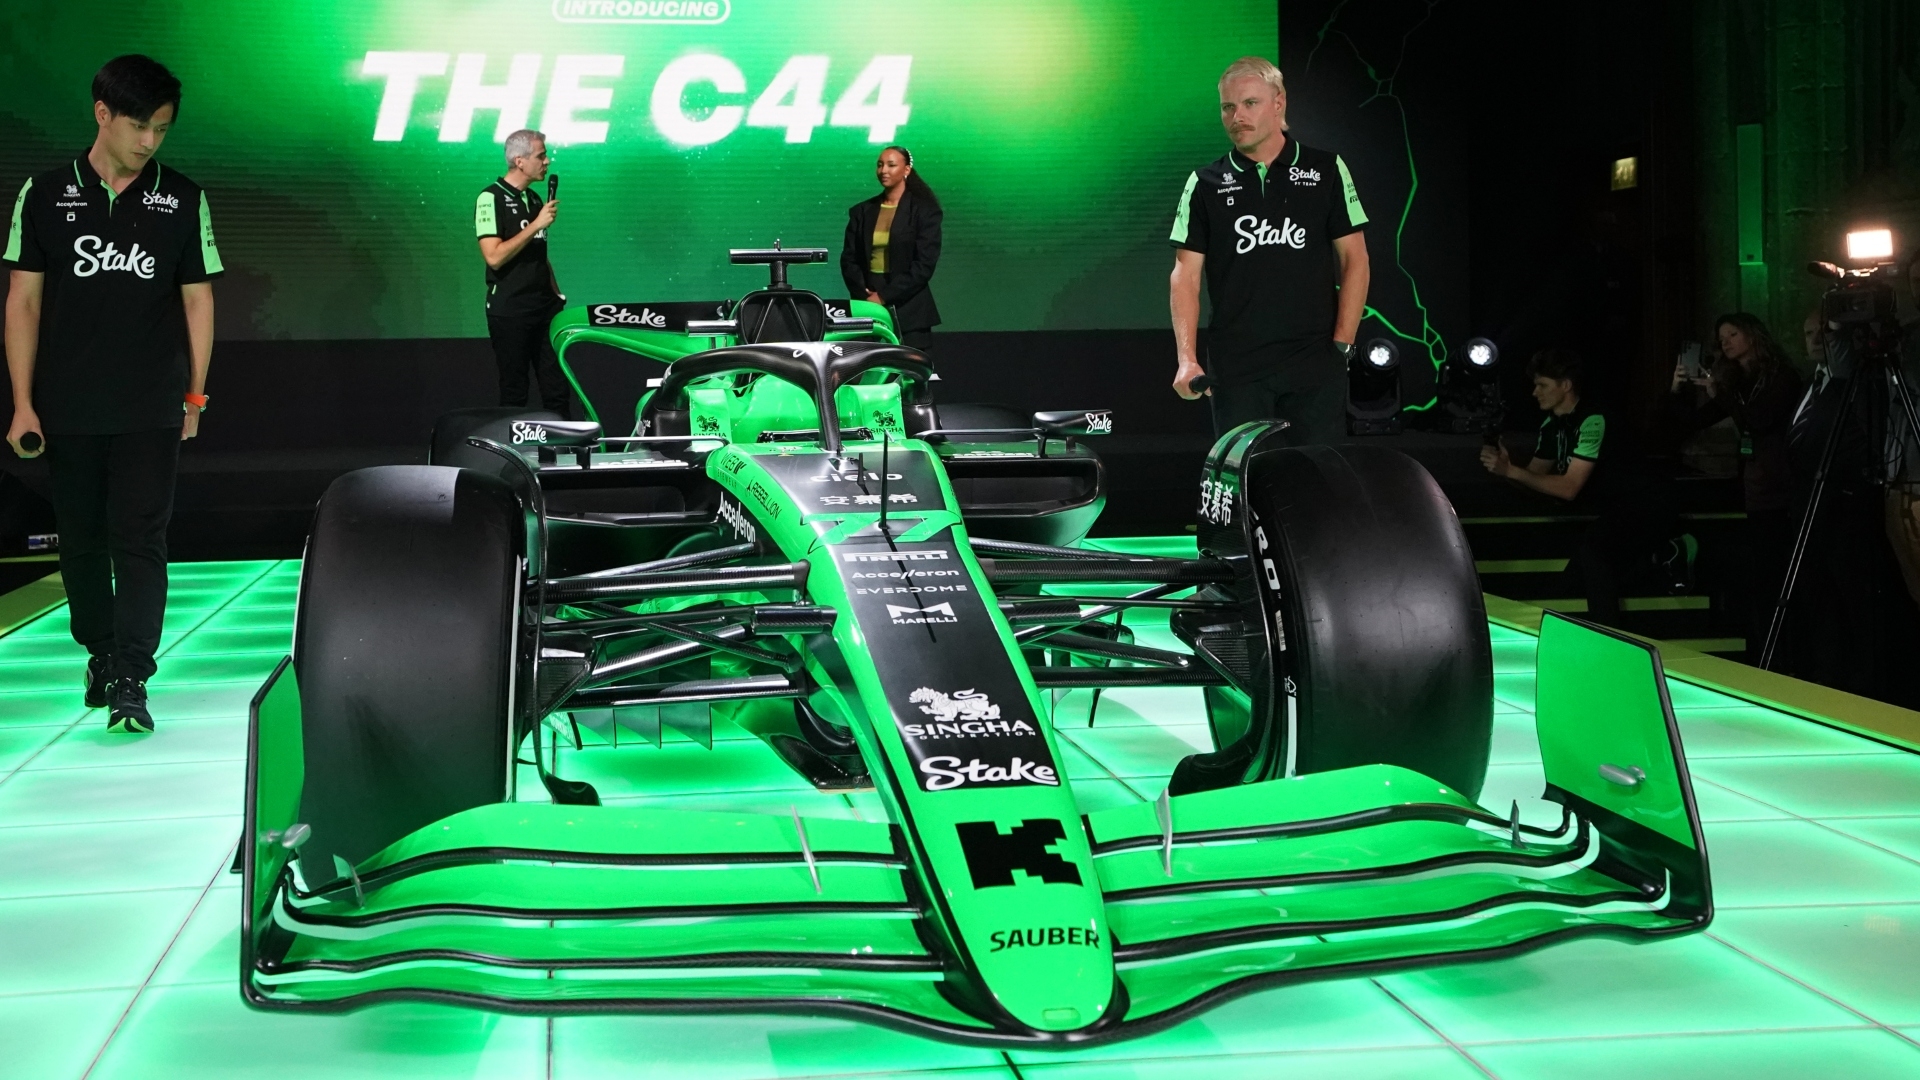 Sauber launches new black and green livery under new name 'Stake'